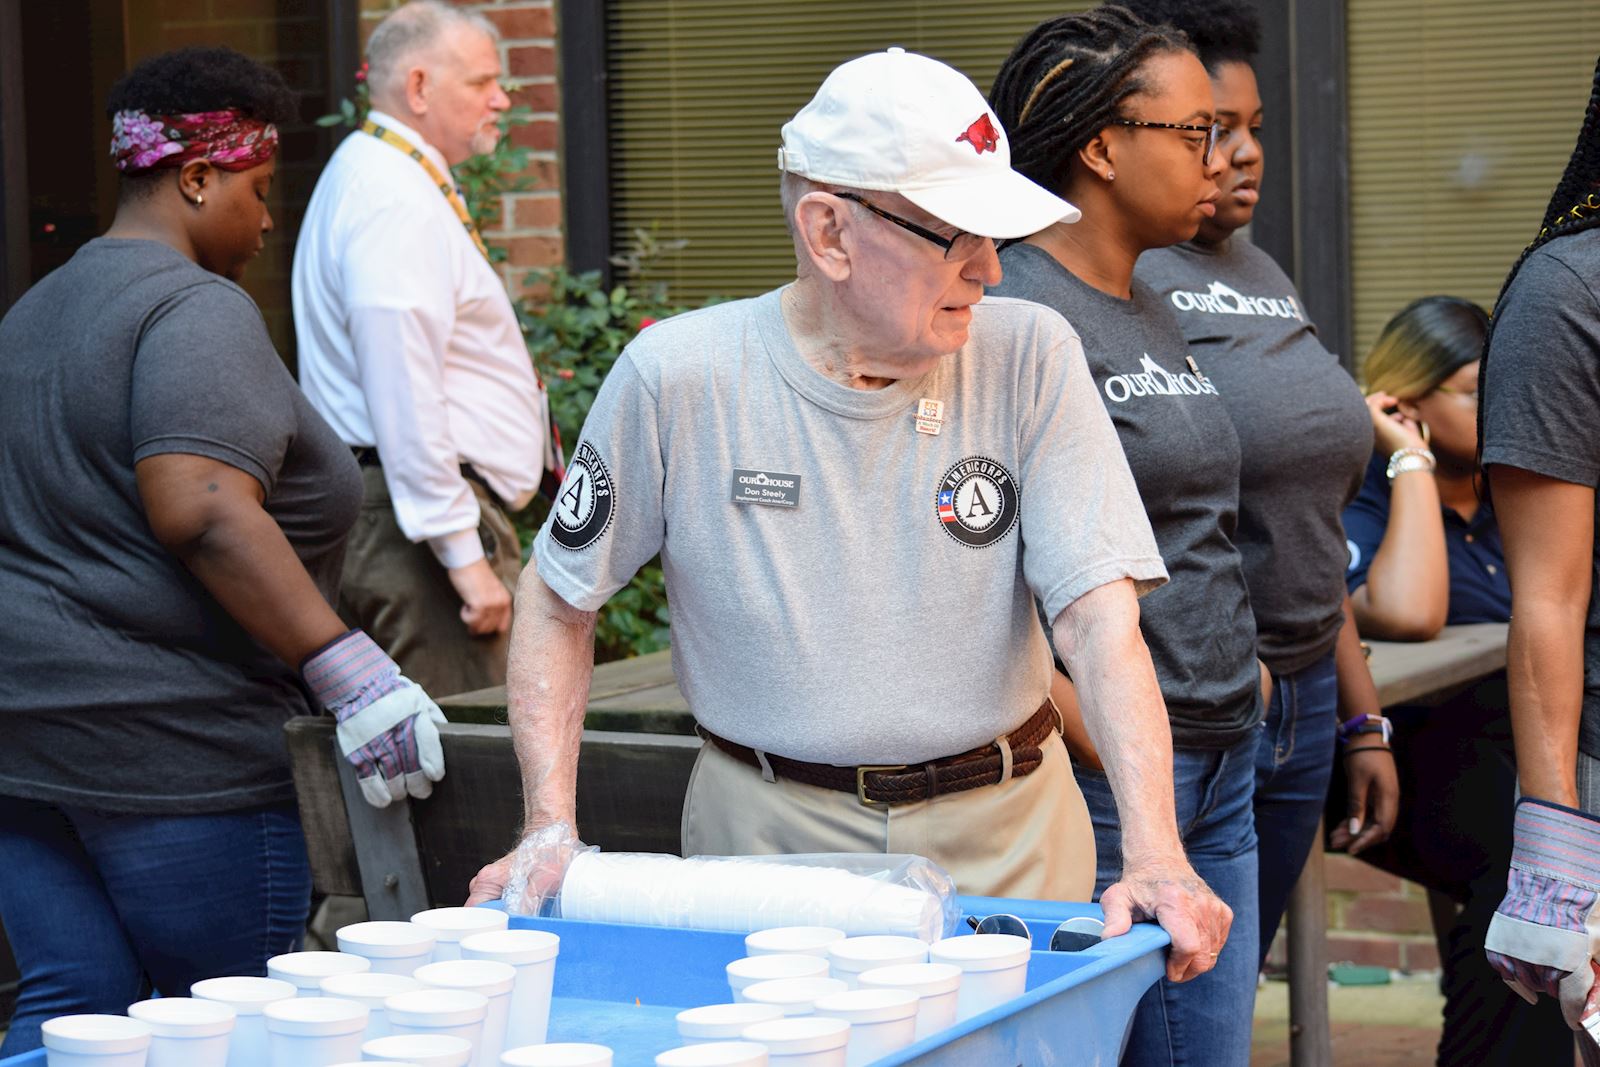 A Senior AmeriCorps member moves a bin with cups to serve the homeless